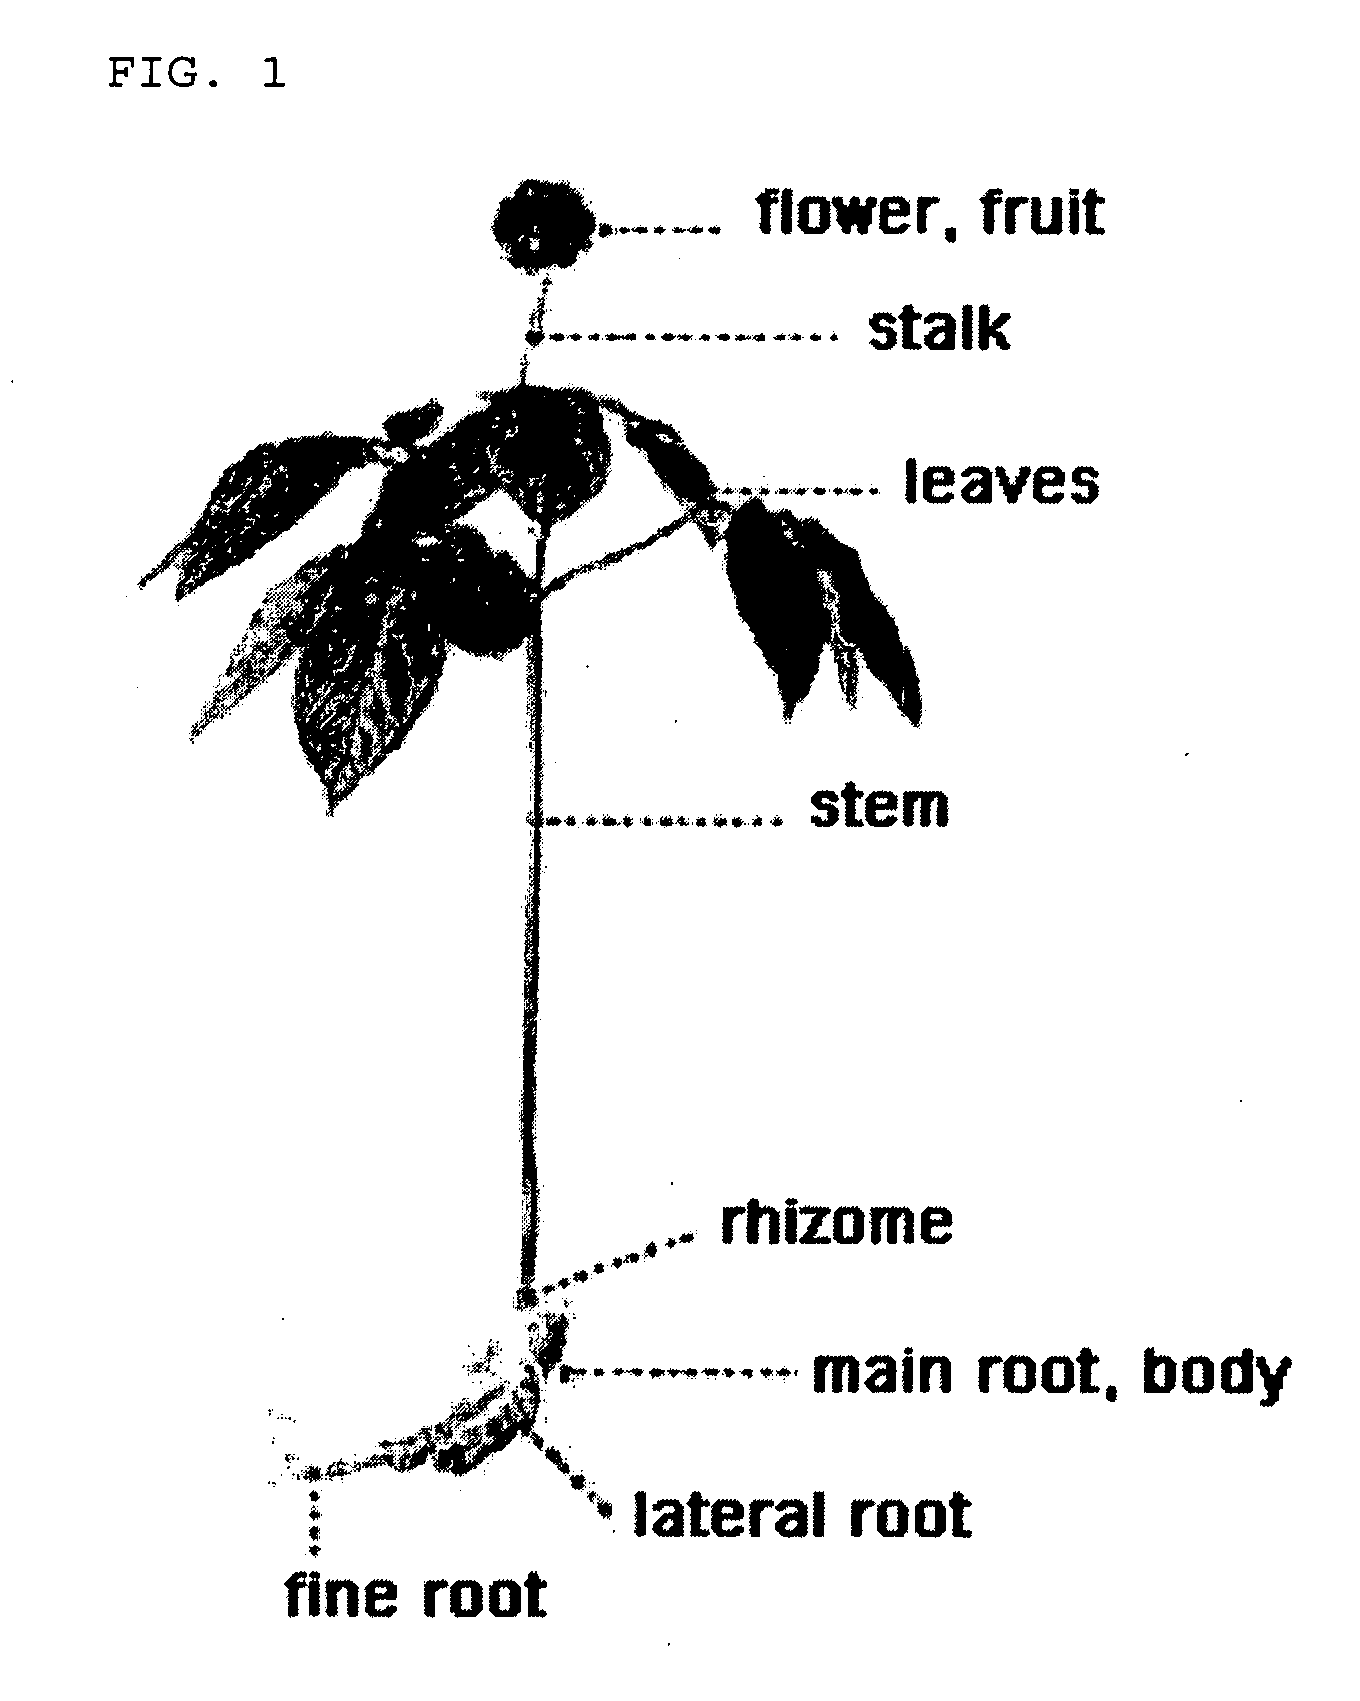 Method for producing ginseng fruit and ginseng flower stalk with high content of ginsenoside